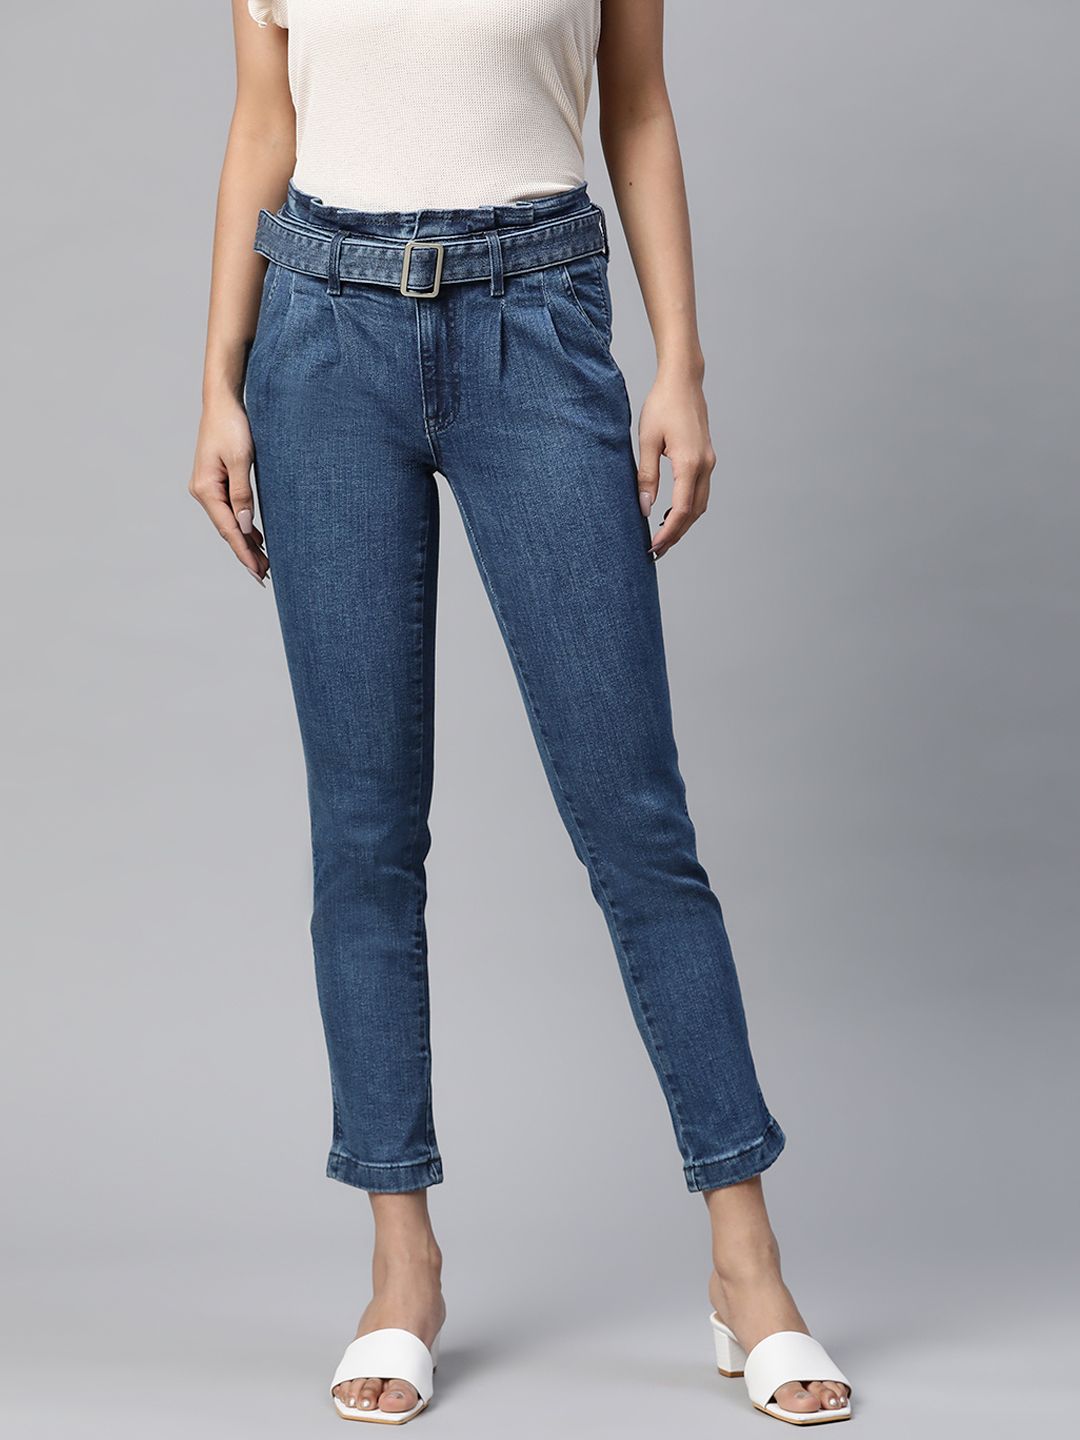 Marks & Spencer Women Navy Blue Slim Fit Stretchable Jeans with Belt Price in India